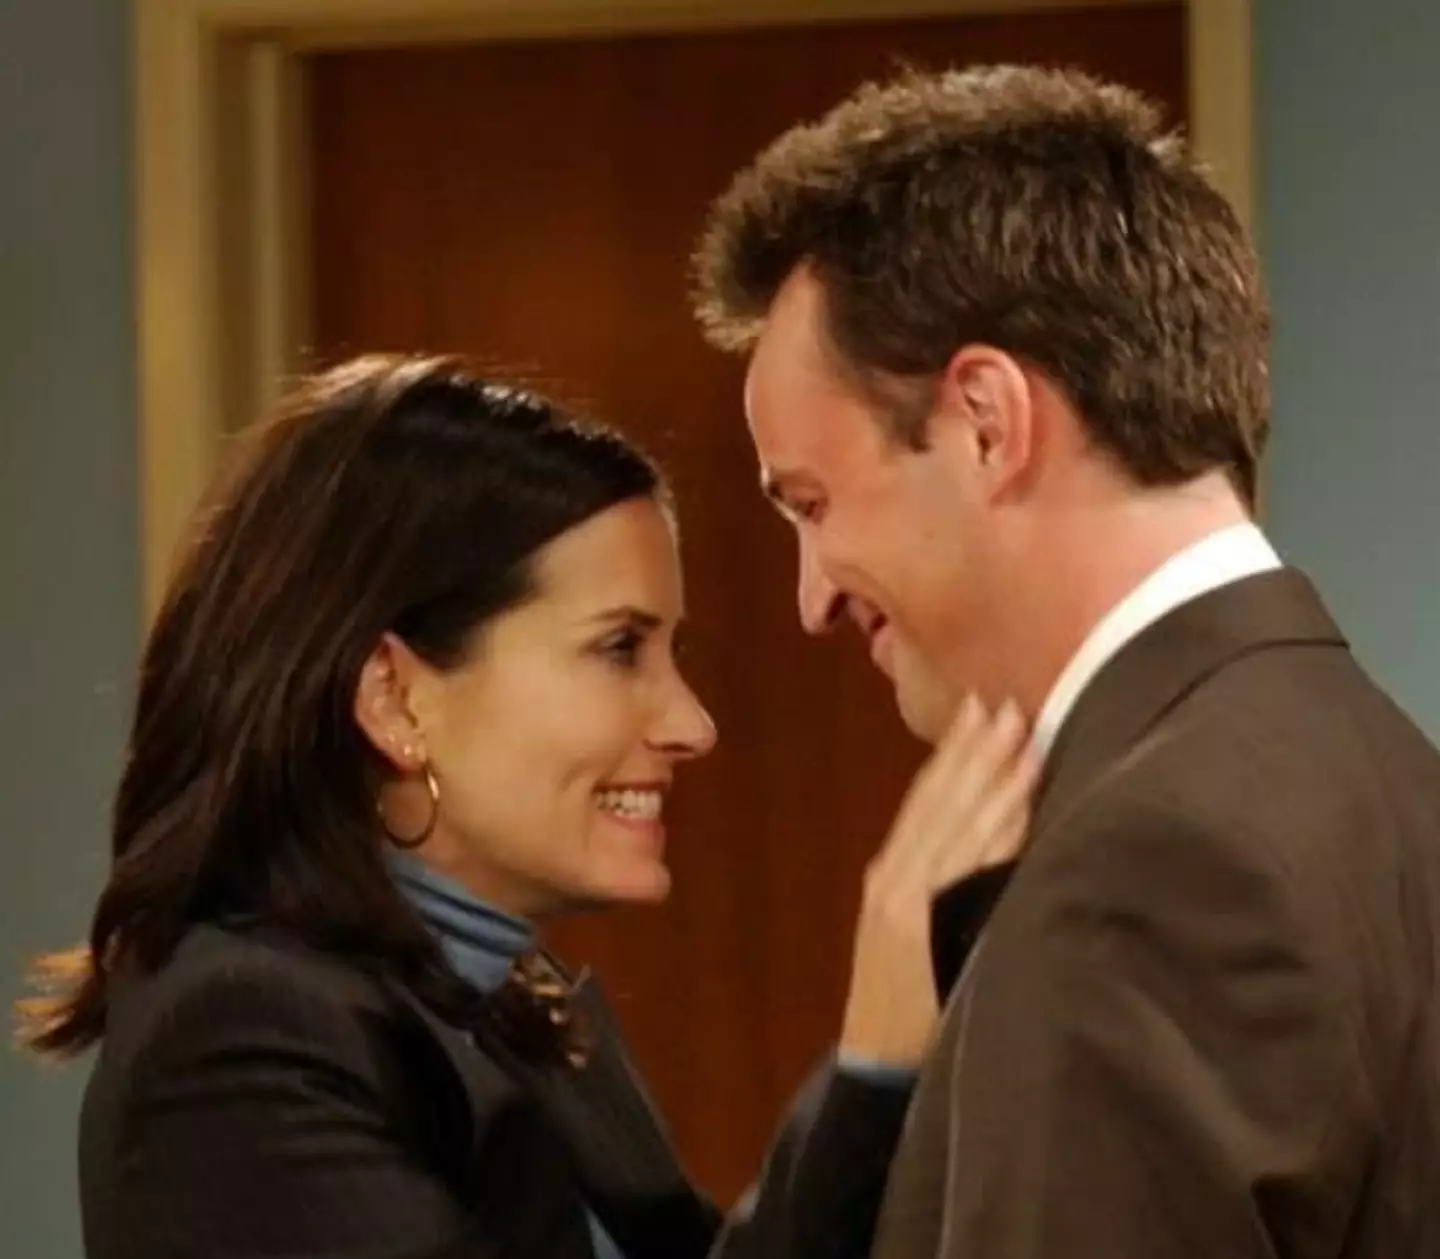 Perry's character in Friends finds love with Monica Geller (Courteney Cox).